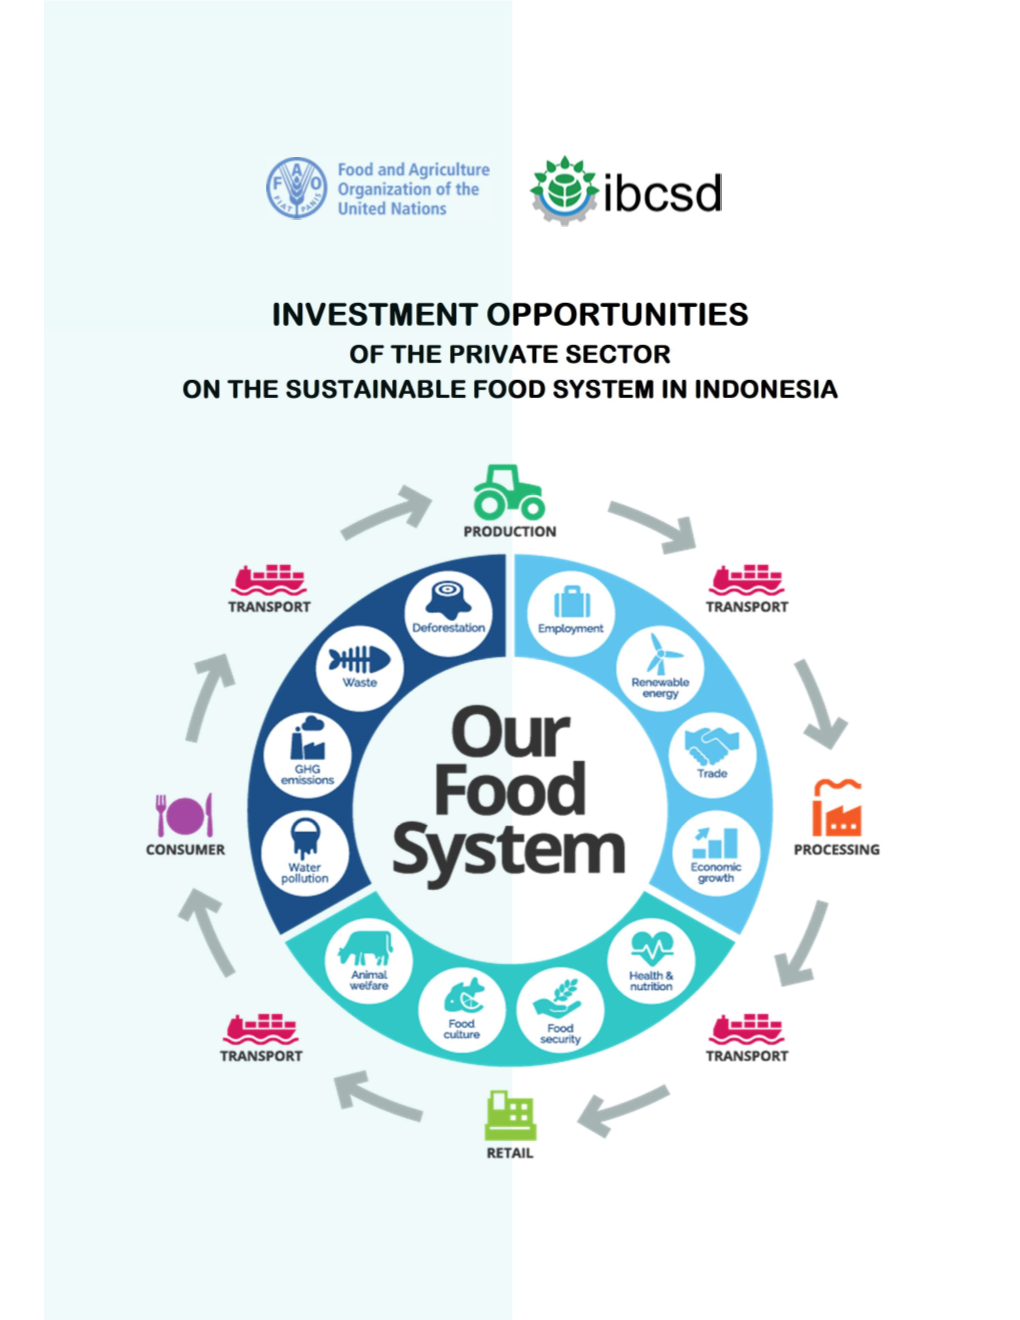 Investment Opportunities of the Private Sector on the Sustainable Food System in Indonesia